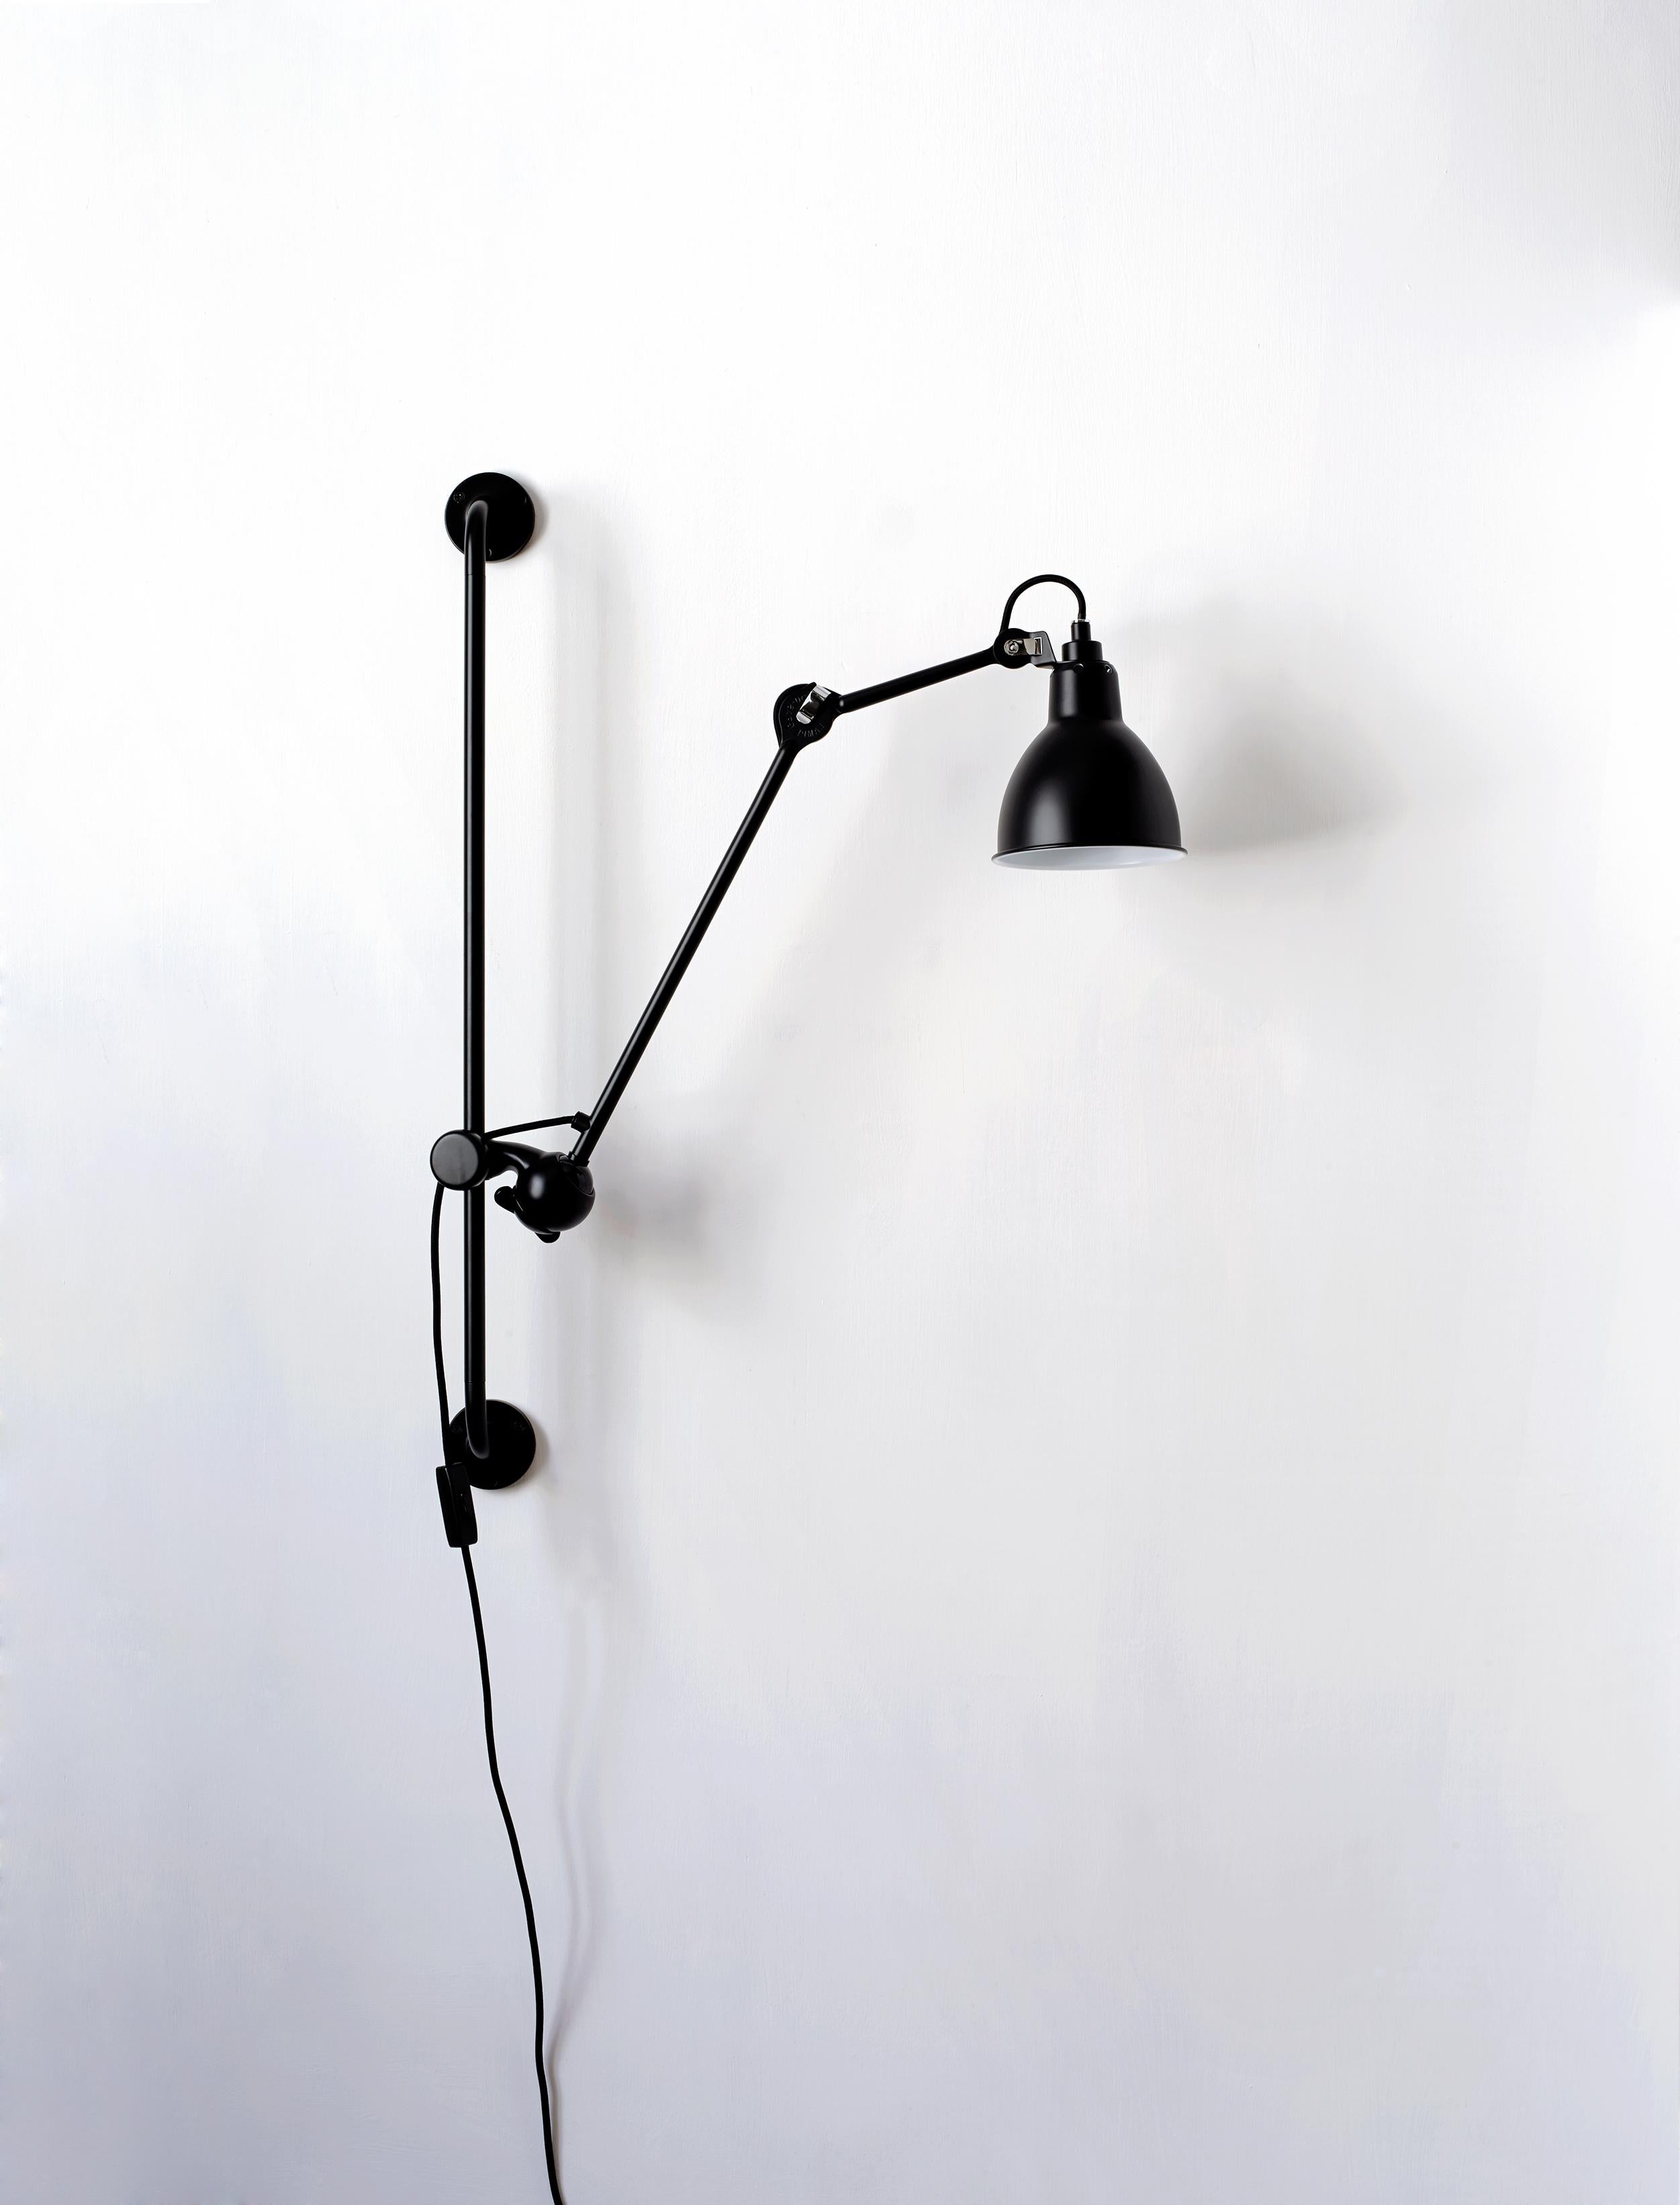 Black Lampe Gras N° 210 wall lamp by Bernard-Albin Gras
Dimensions: D 39 x W 14 x H 78 cm
Materials: steel
Also available: different colors and other shade available.

All our lamps can be wired according to each country. If sold to the USA it